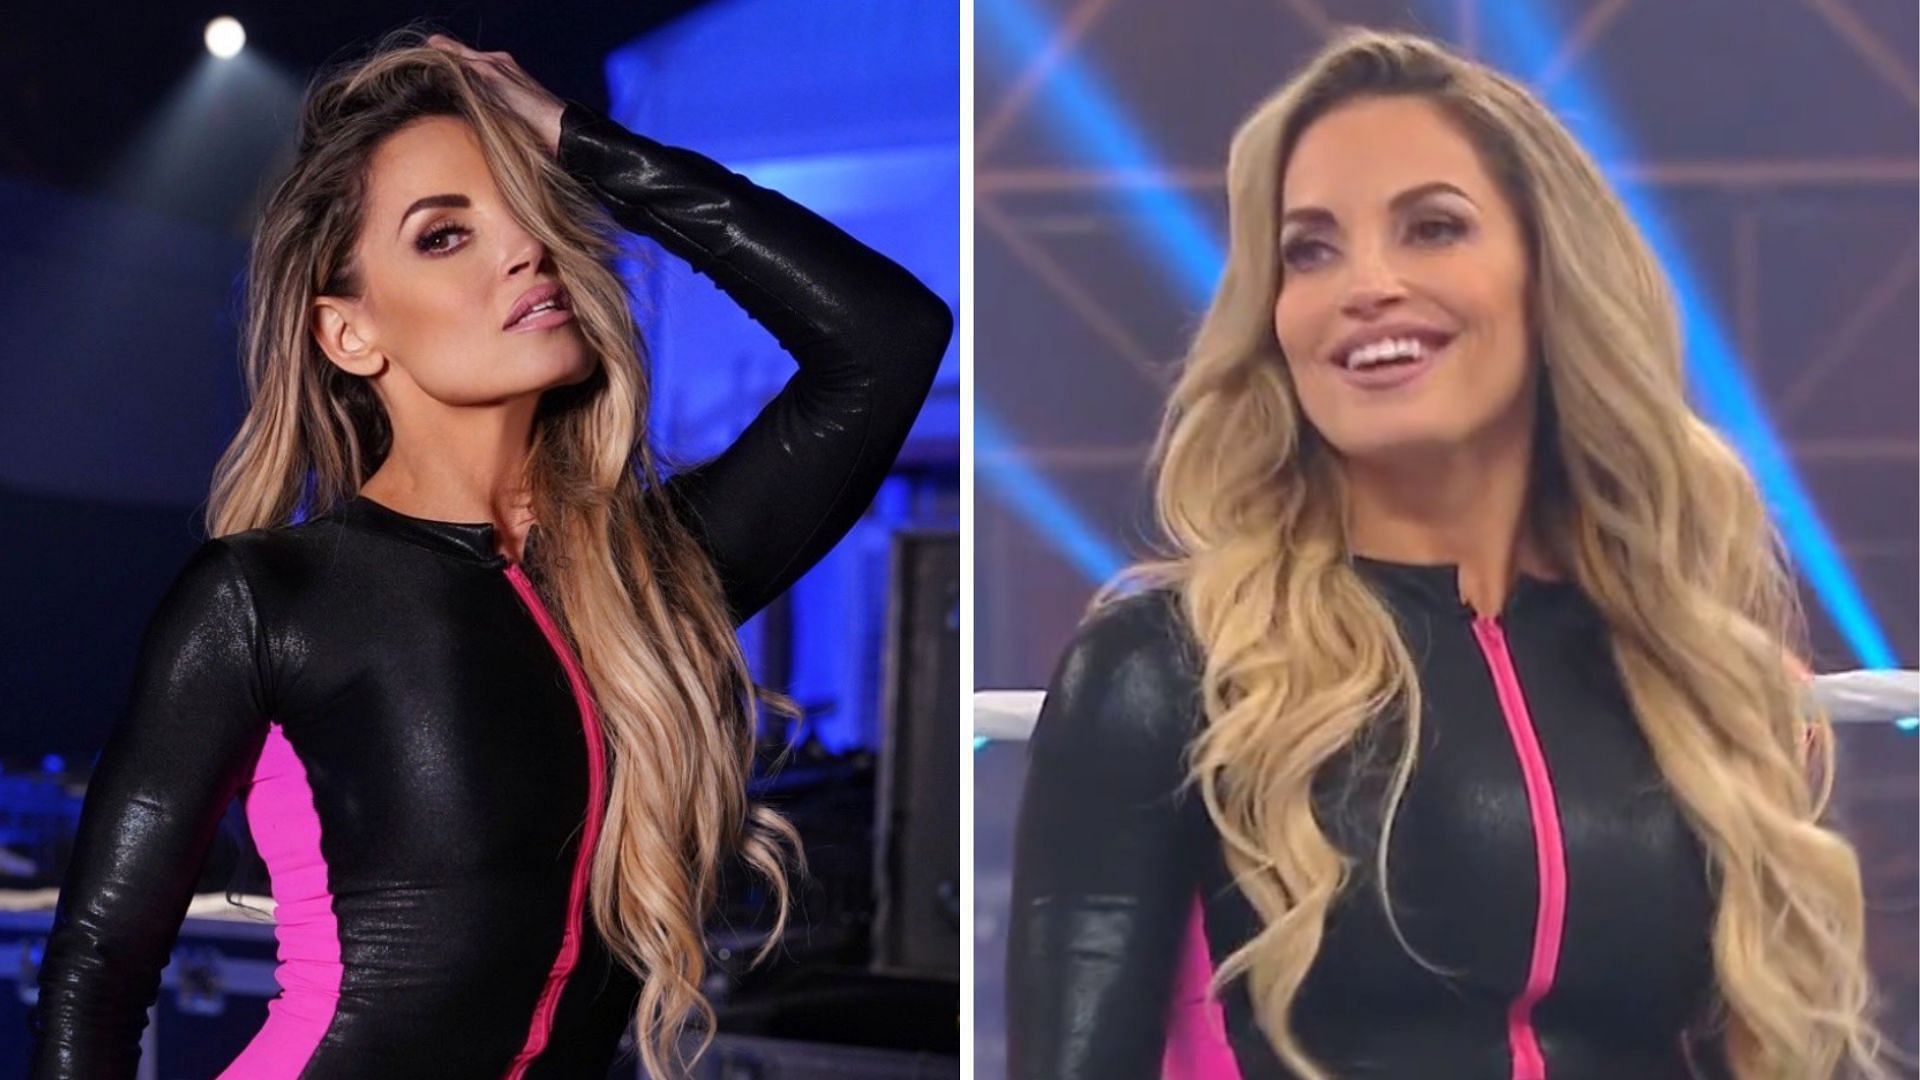 Trish Stratus picked up a victory at Night of Champions.